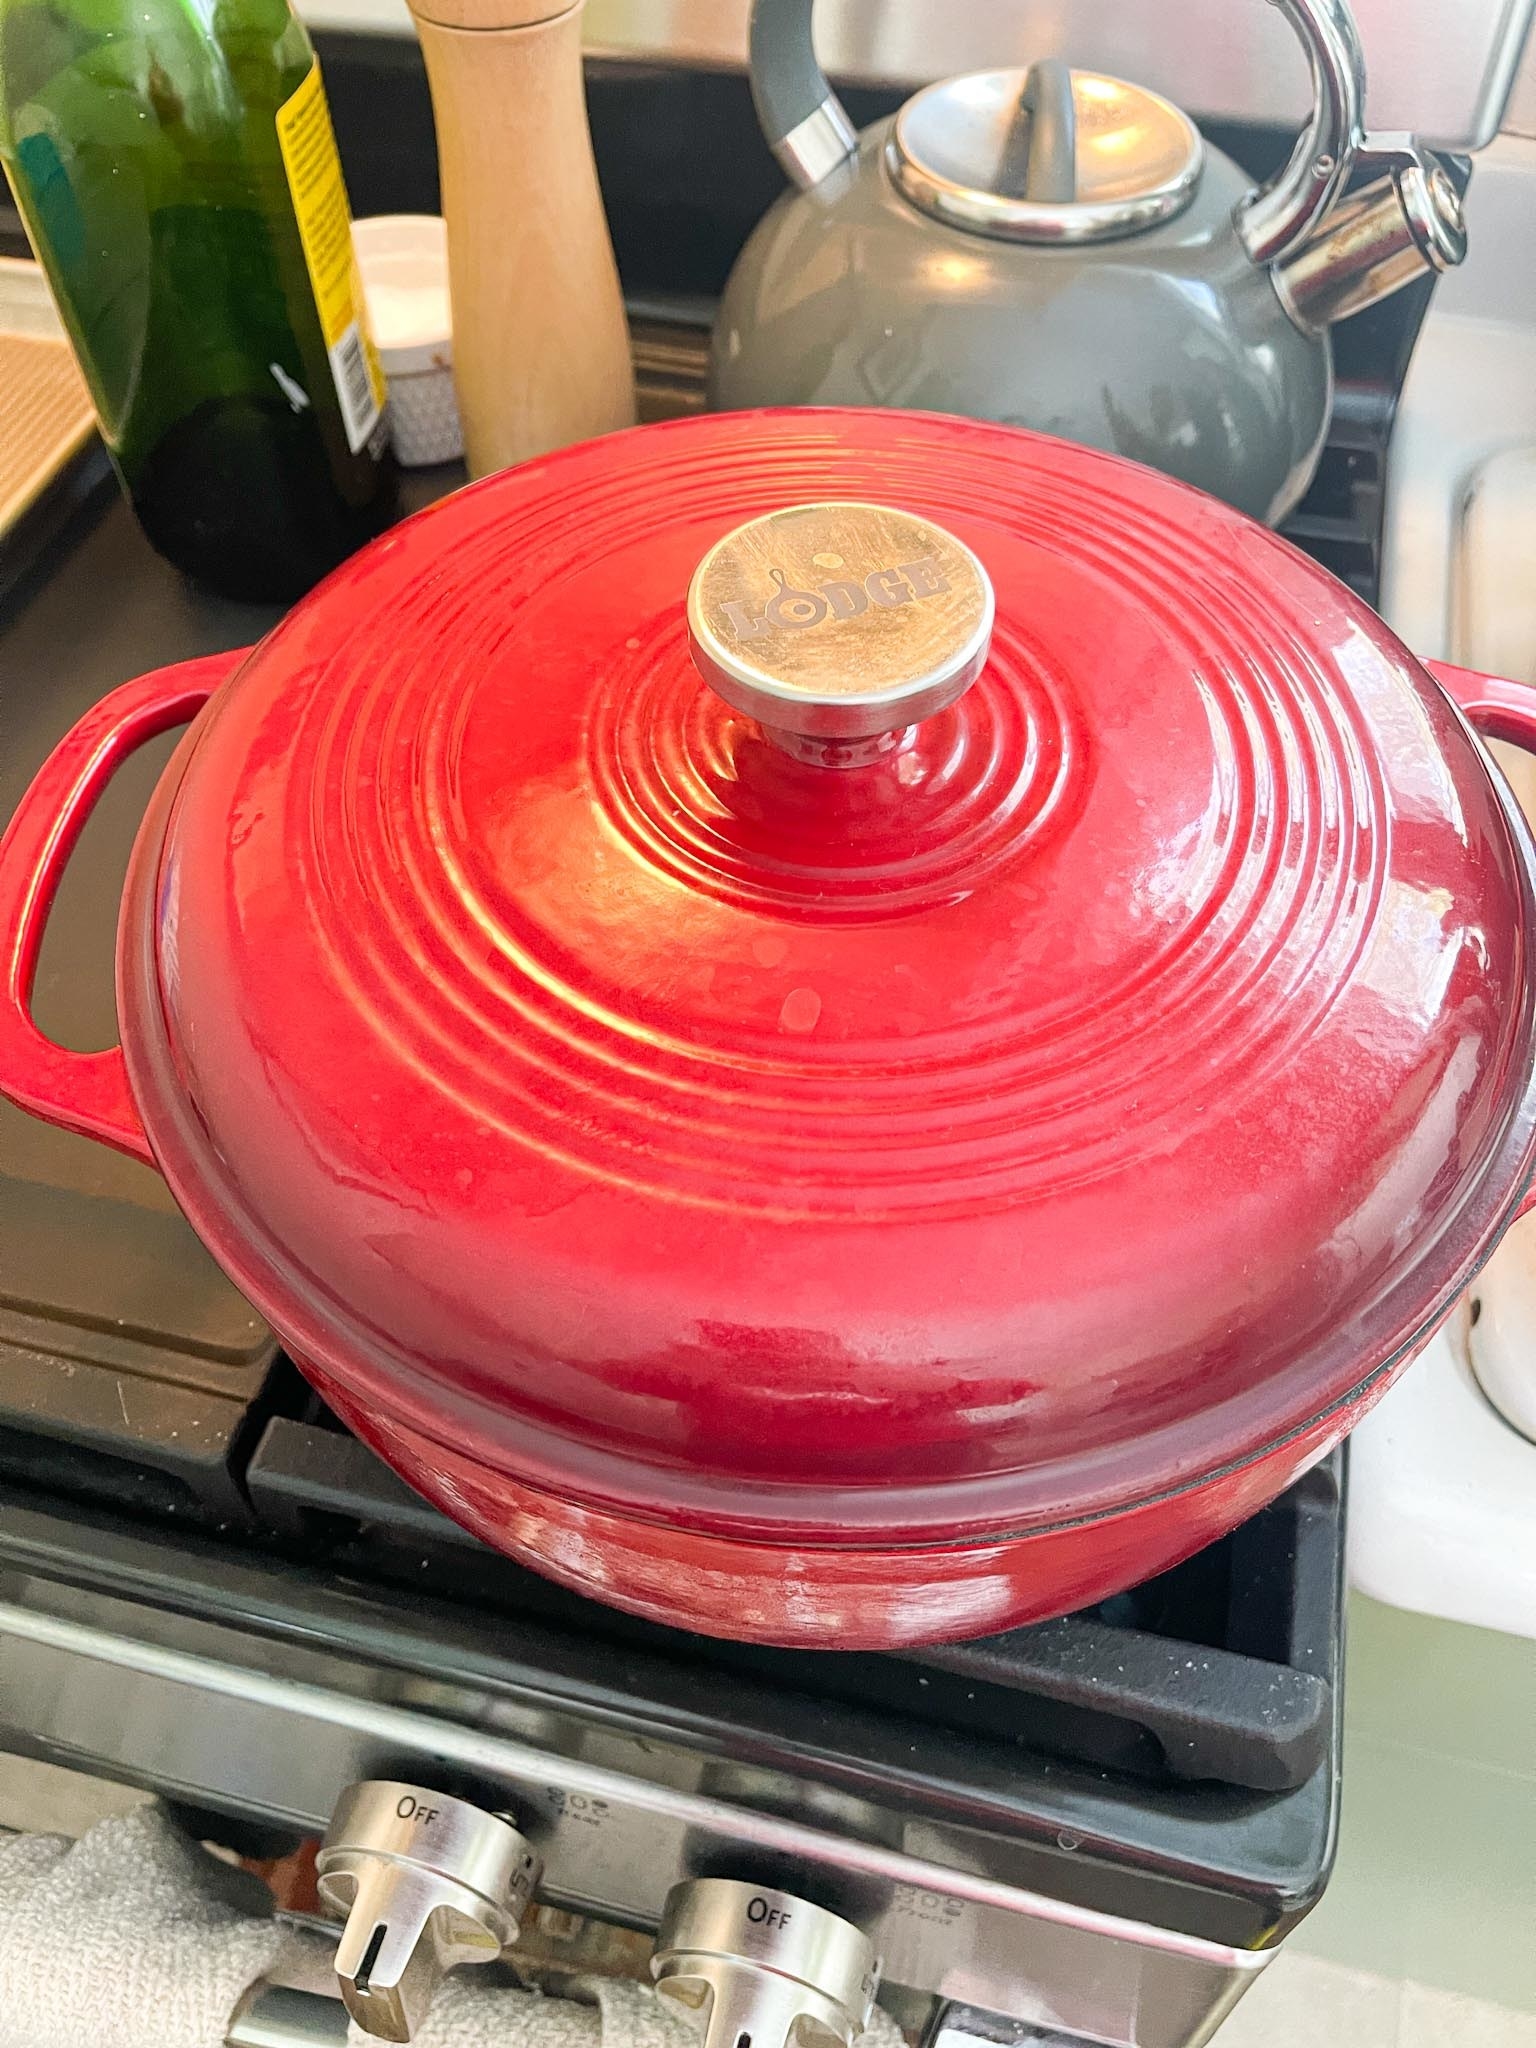 Red Dutch oven on a stovetop